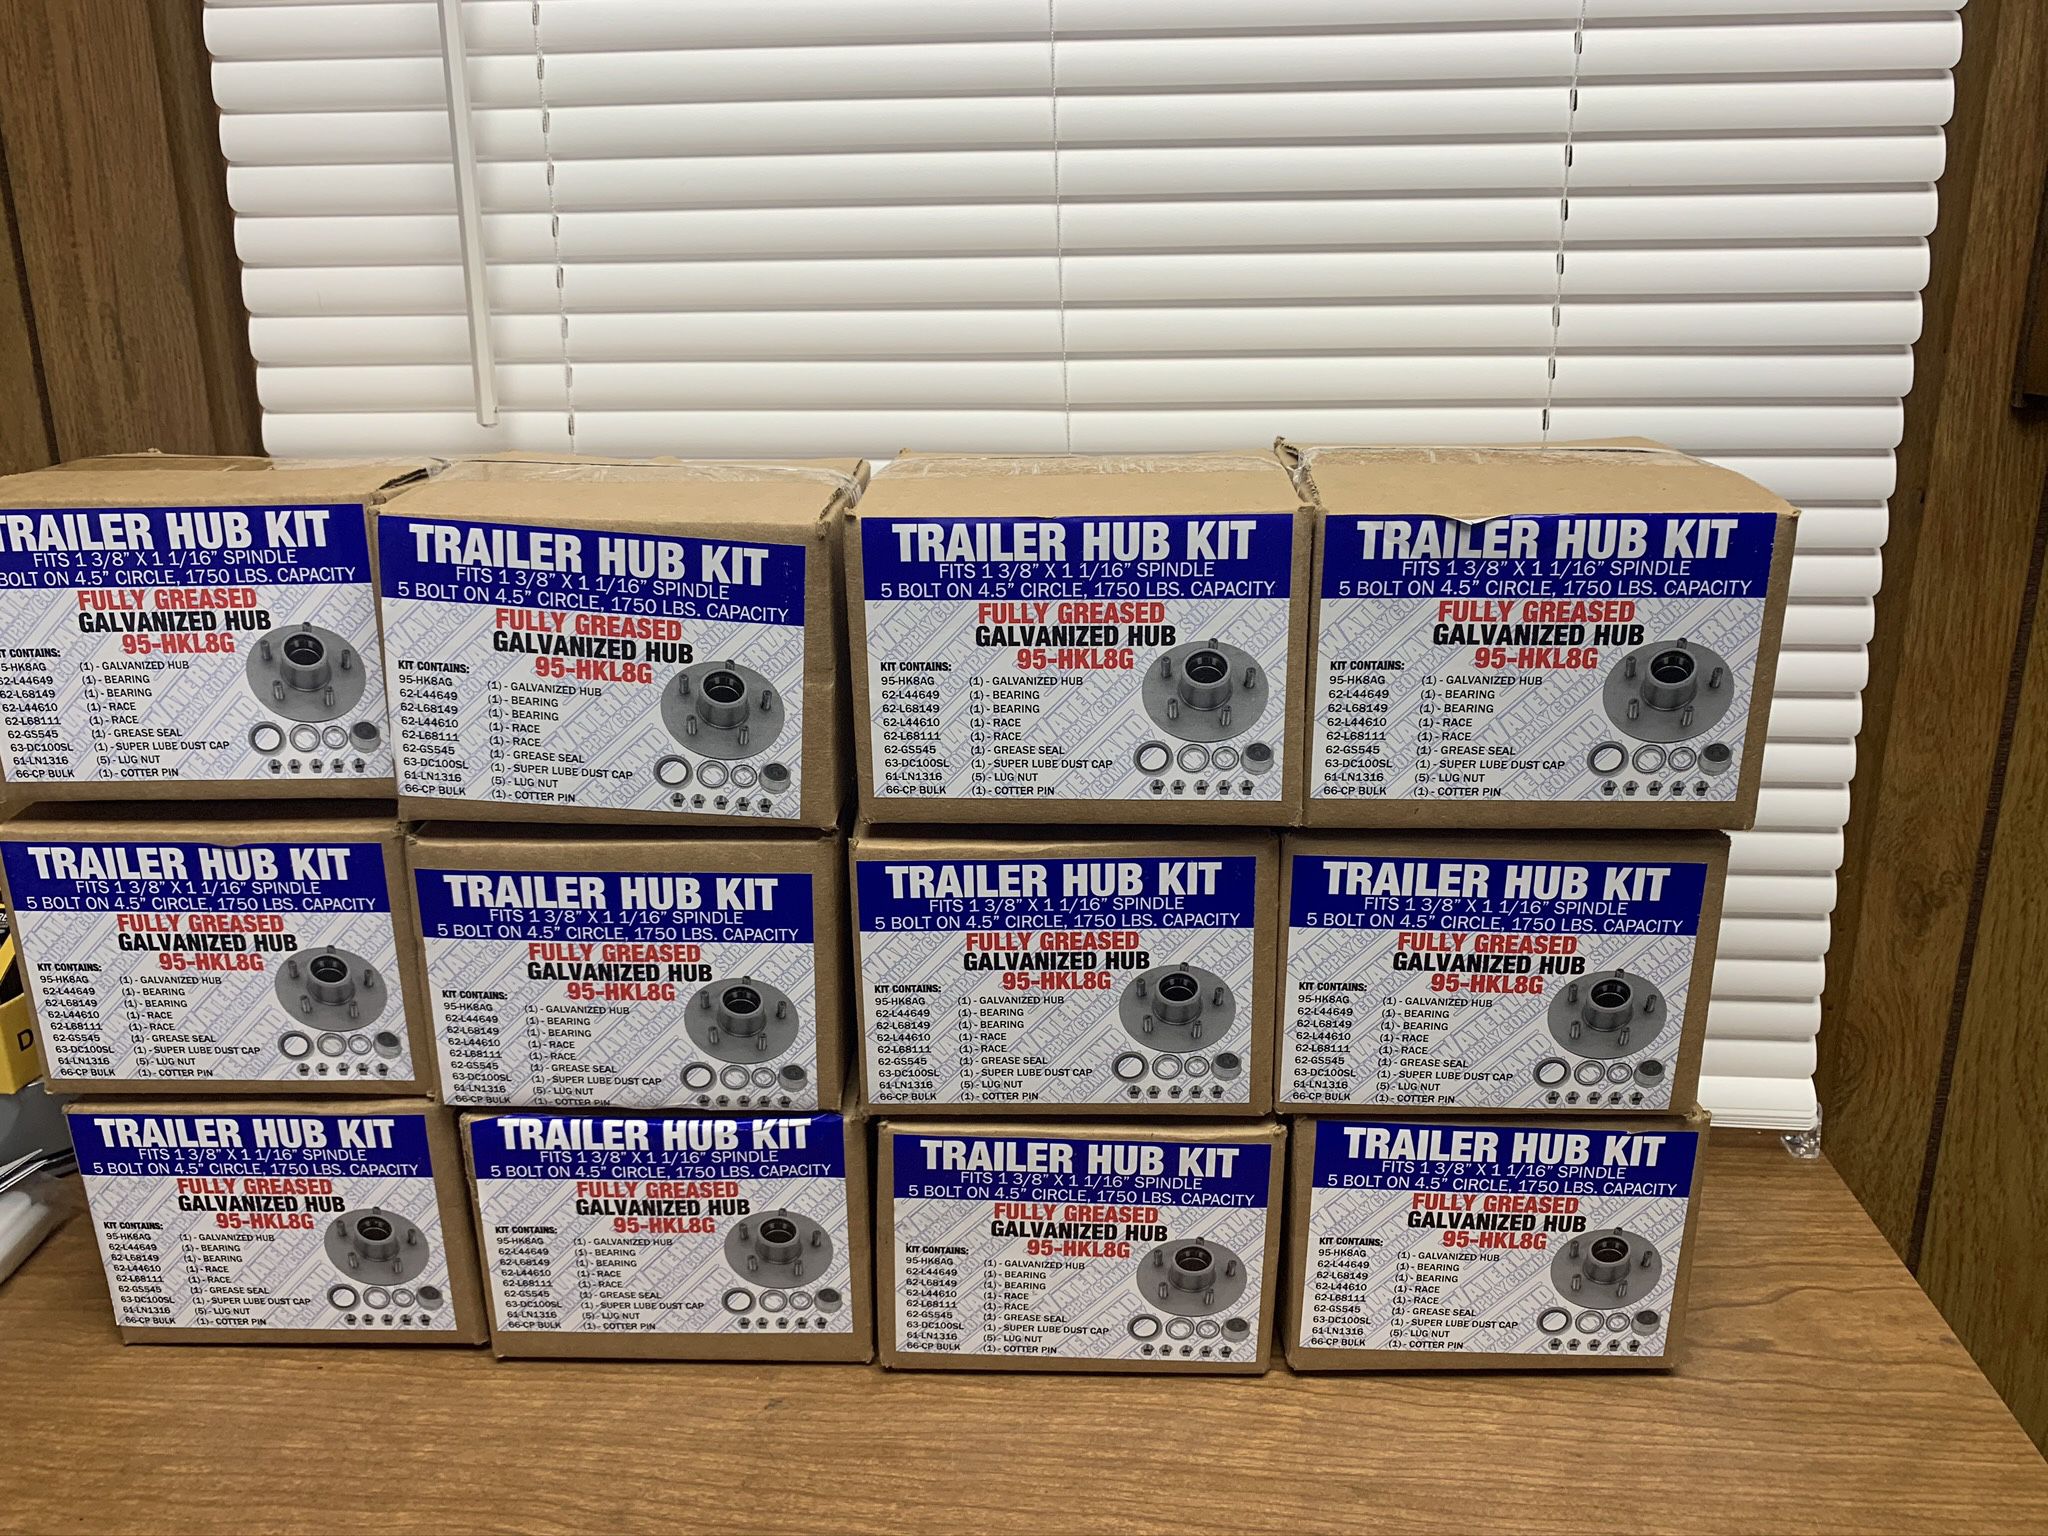 Boat trailer parts!!! Instock brand new